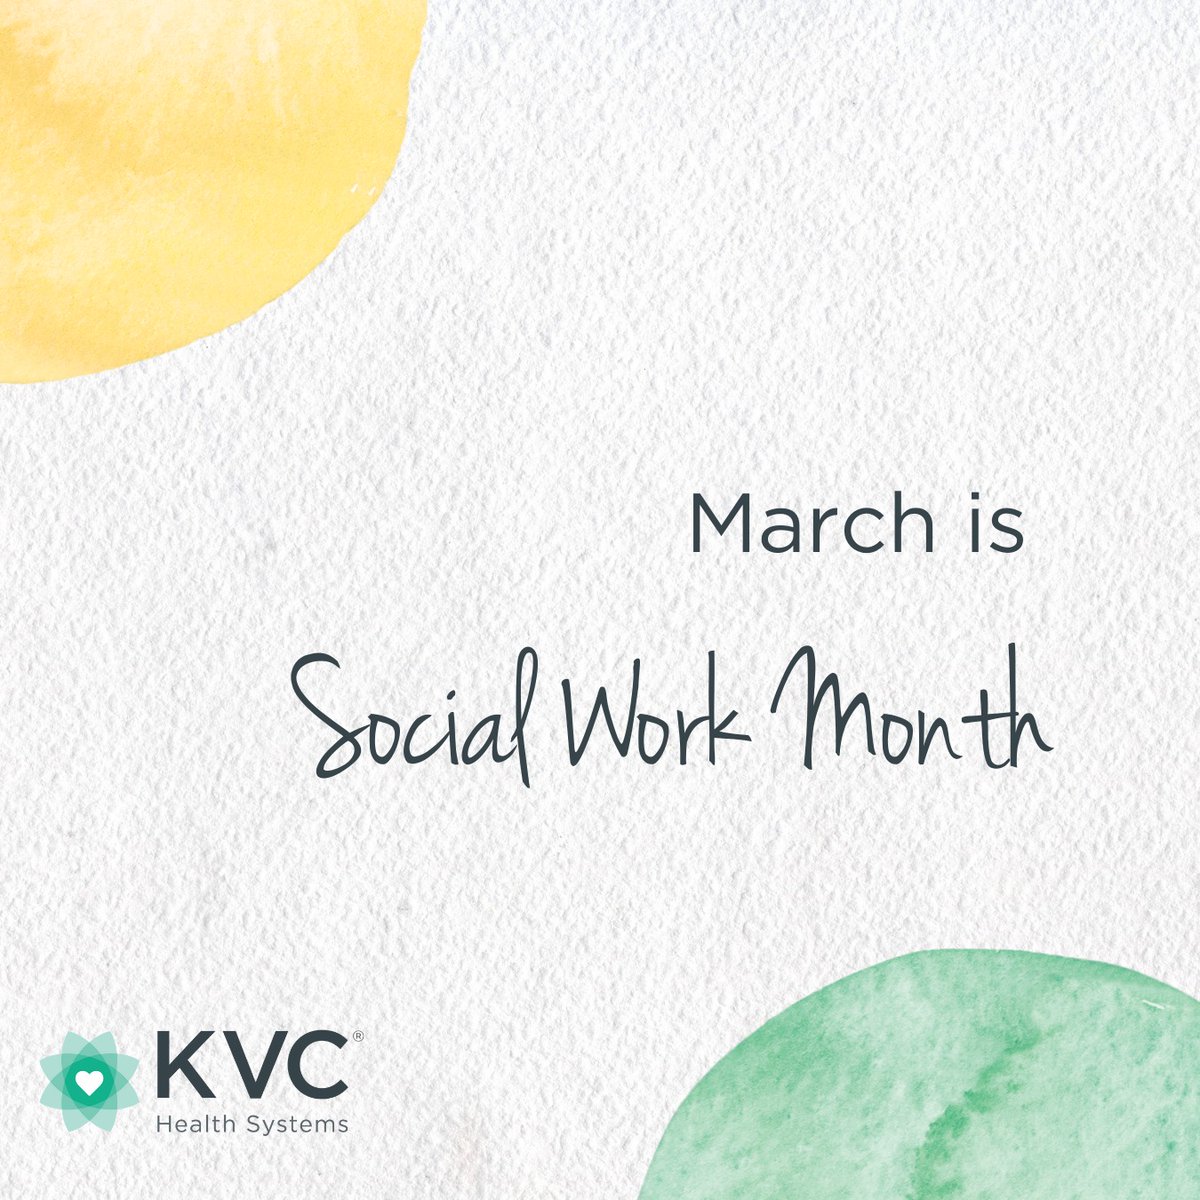 Each time you host an event at Ball Event Center, you are supporting @KVCkids #Repost' Happy Social Work Month! During March, KVC is celebrating all the impact social workers and clinical professionals have on our community!'